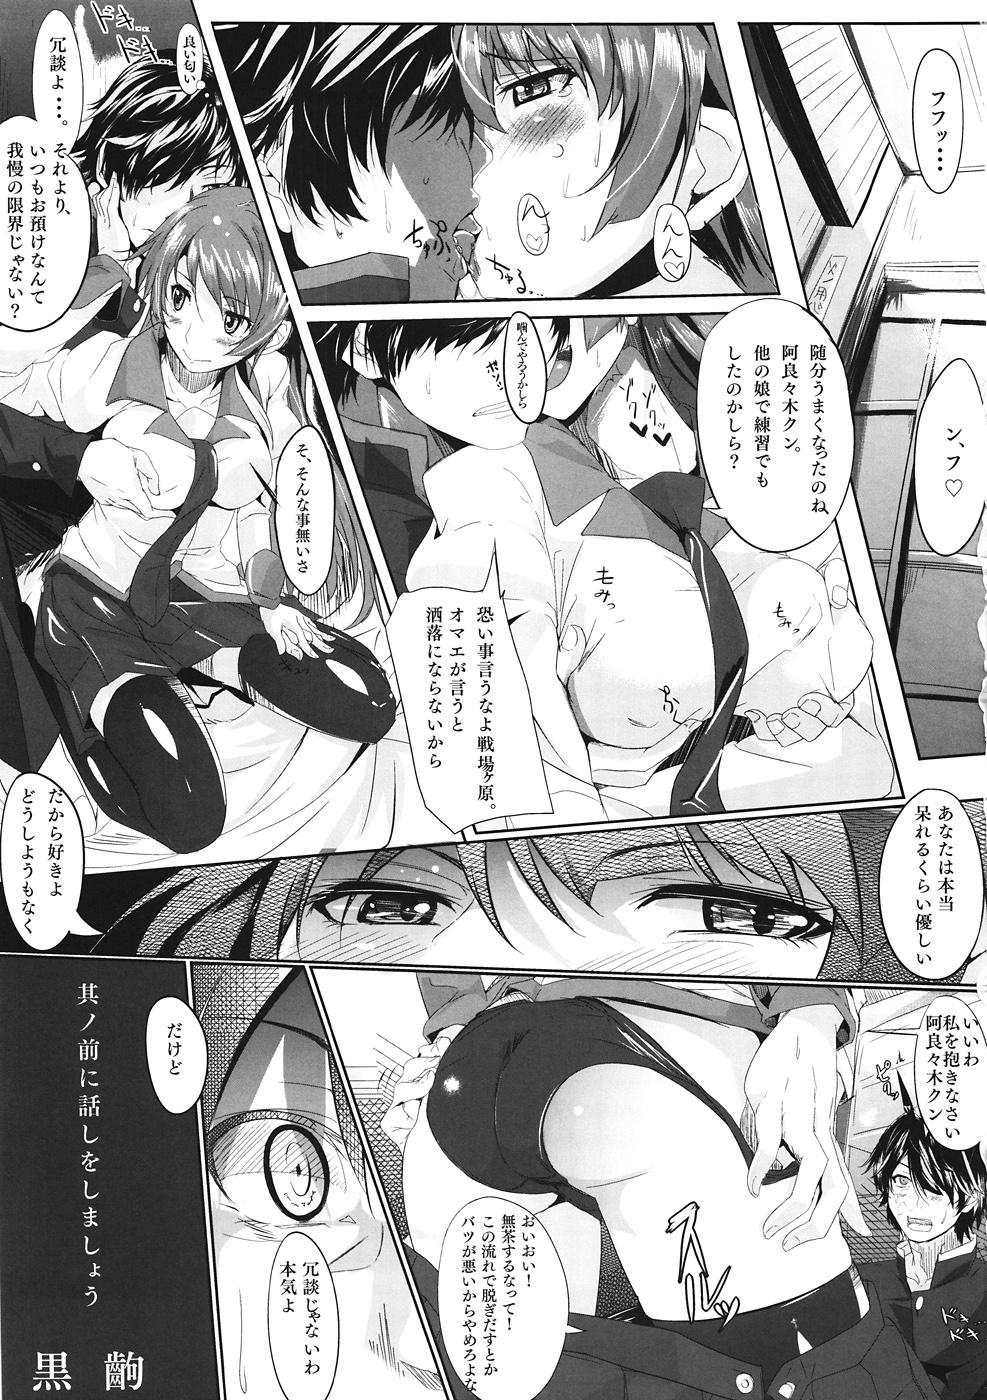 Hardcoresex Cut and Come Again - Bakemonogatari For - Page 2